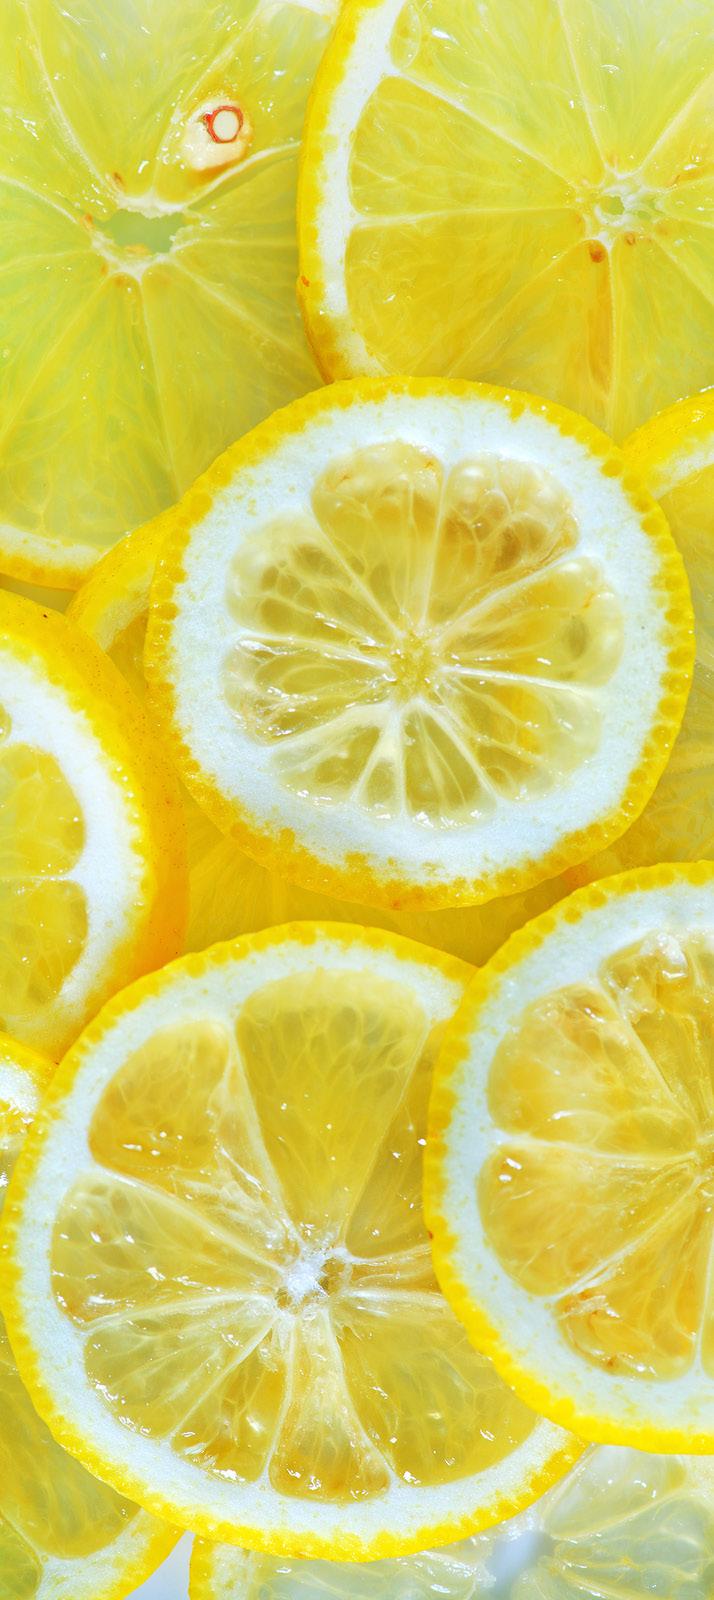 5. Lemon Oil: Lemon is best known for its ability to cleanse toxins from any part of the body.